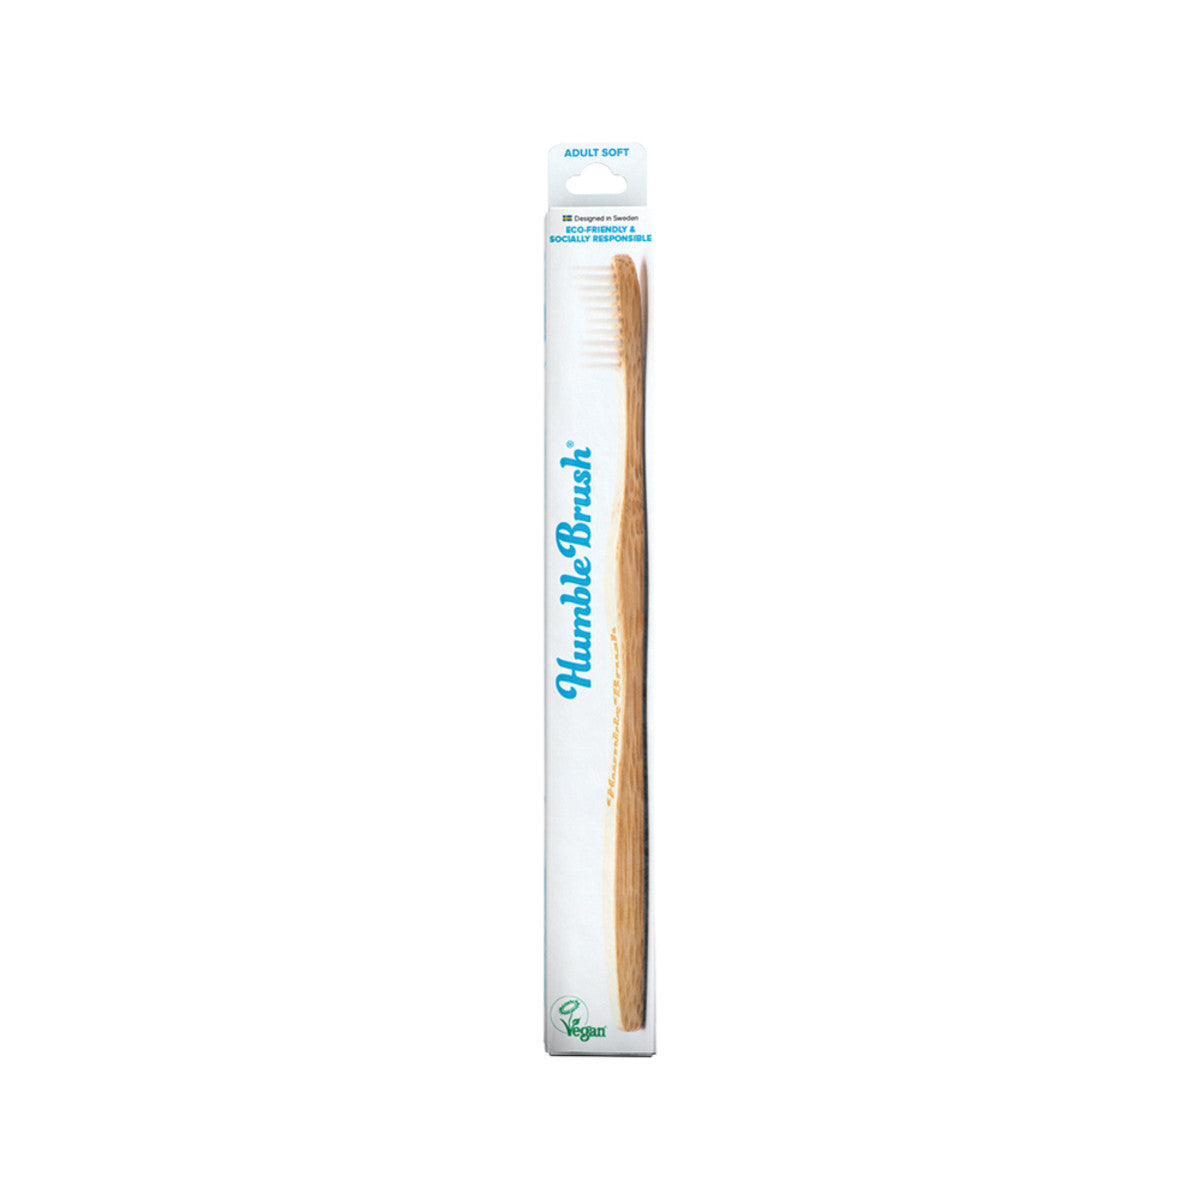 The Humble Co. Toothbrush Bamboo Adult Soft White